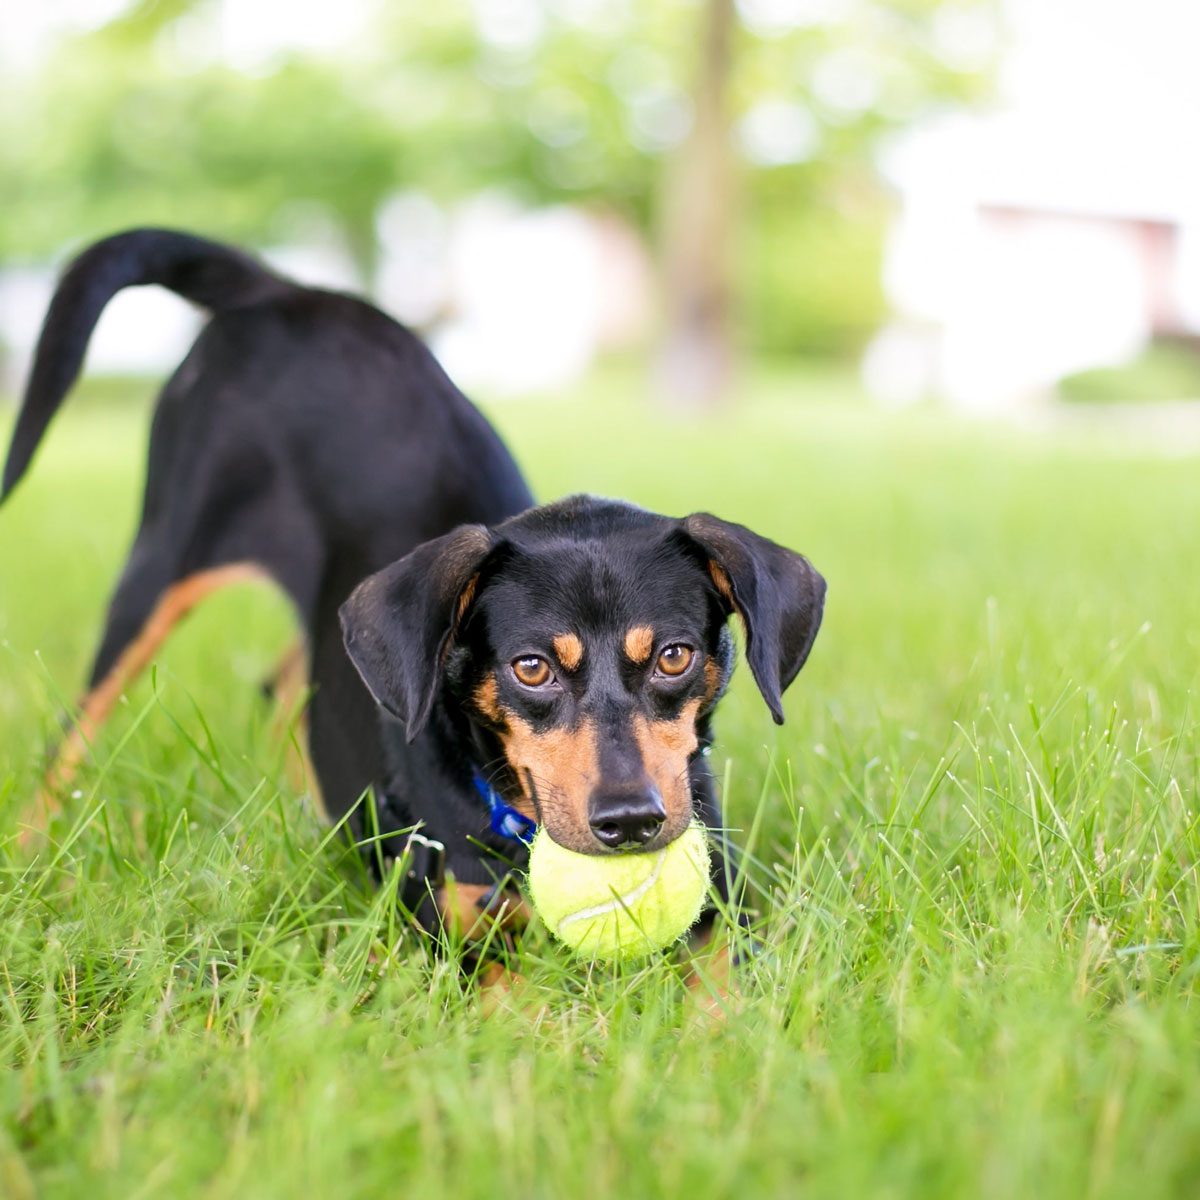 A playful black and red Dachshund mixed breed dog in a play bow position with a ball in its mouth